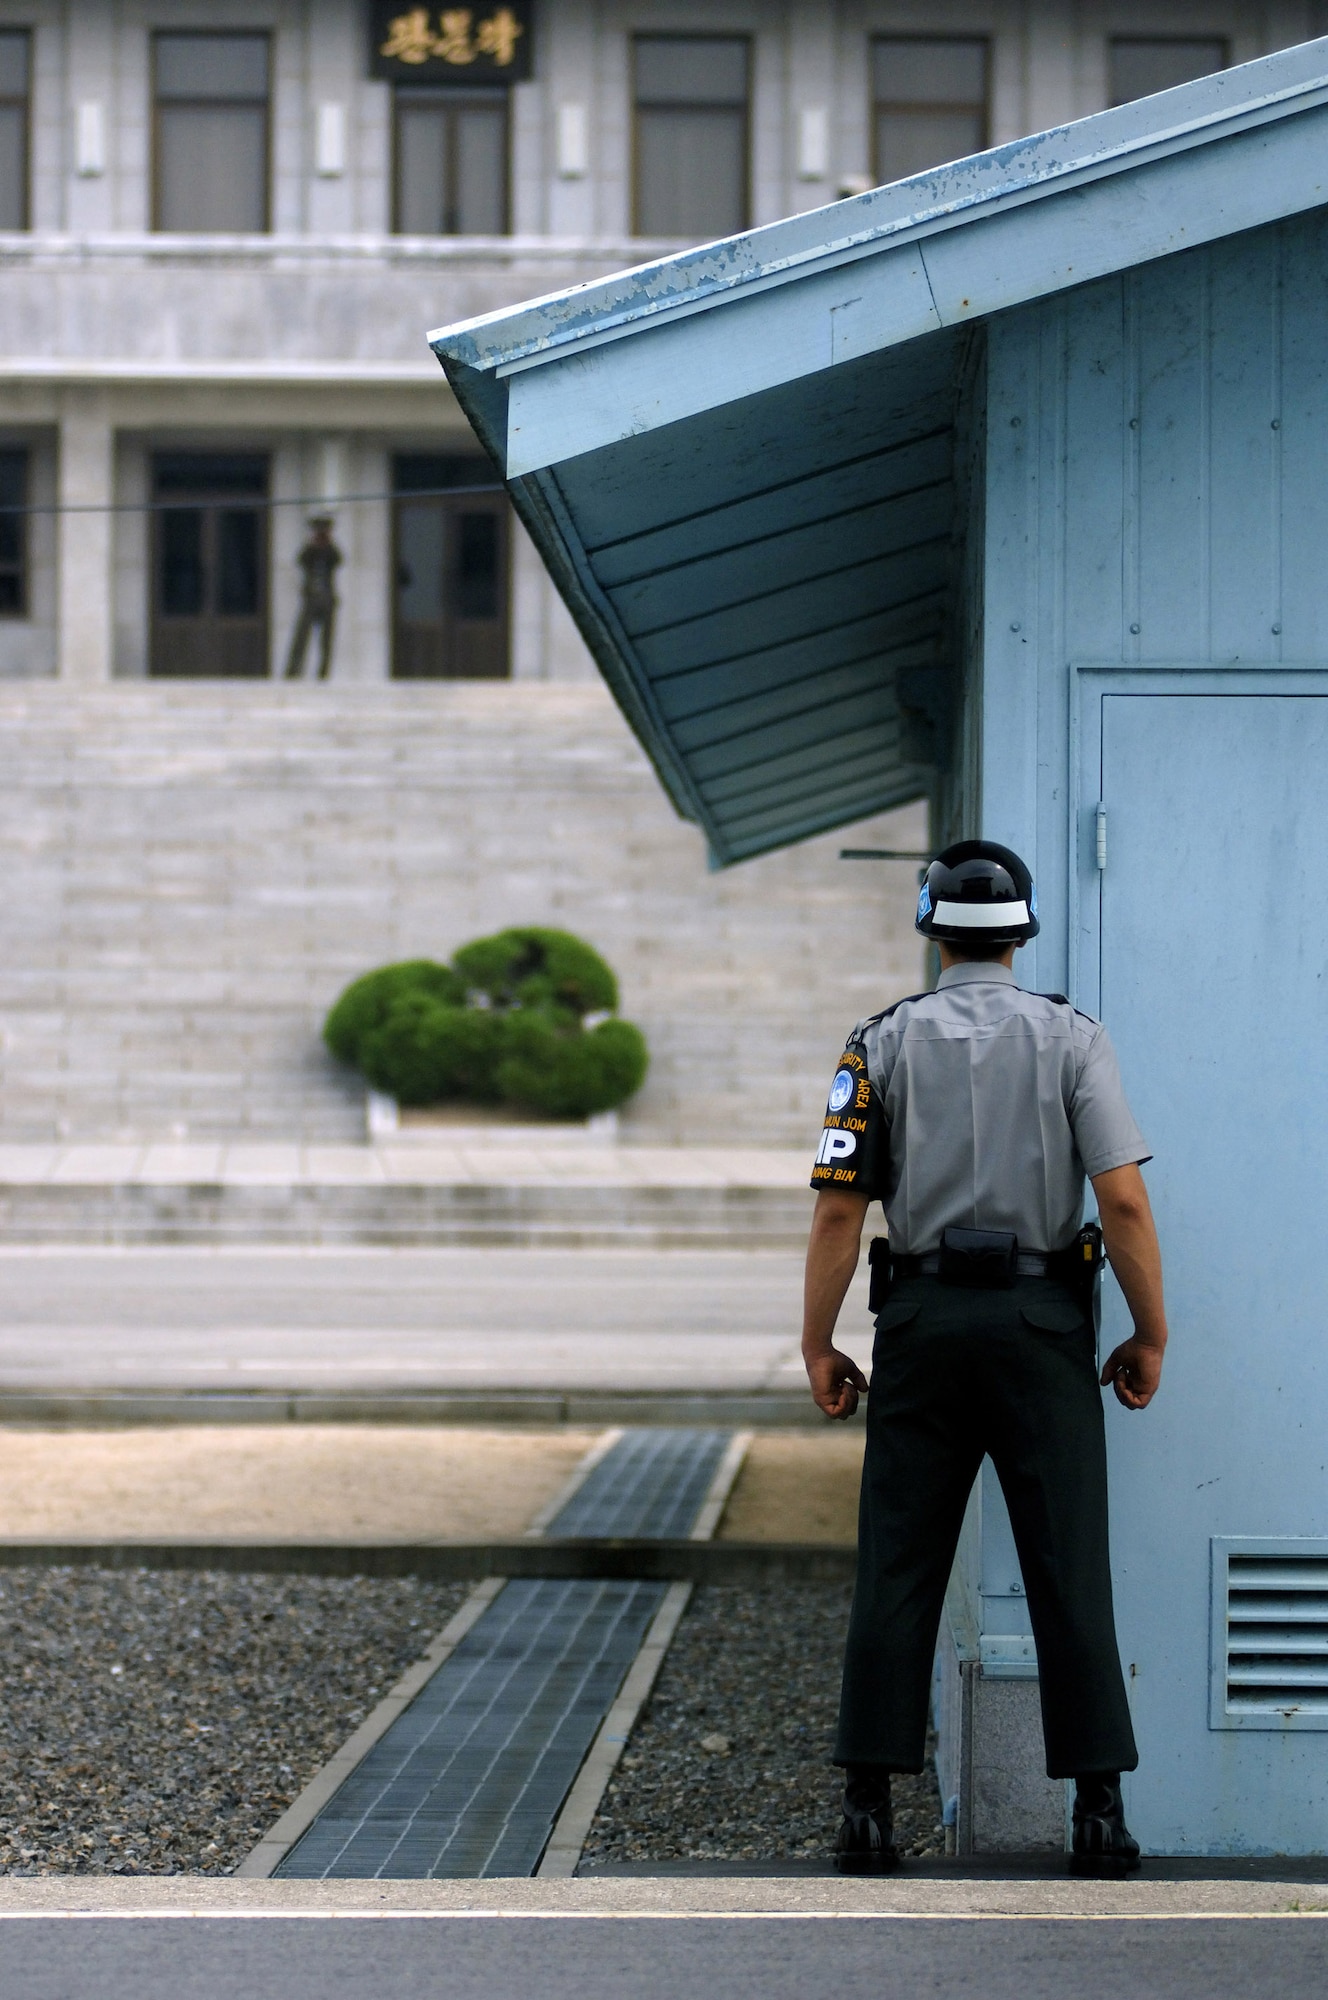 A South Korean military policeman stands guard inside the Korean Demilitarized Zone during a Sept. 13 tour held to honor Korean War veterans in Panmunjeom, South Korea. The joint security area is the only place where North and South Korea connect. Air Force Korean War veterans are visiting South Korea during a weeklong tour in observance of the Air Force's 60th Anniversary. (U.S. Air Force photo/Staff Sgt. Bennie J. Davis III) 
